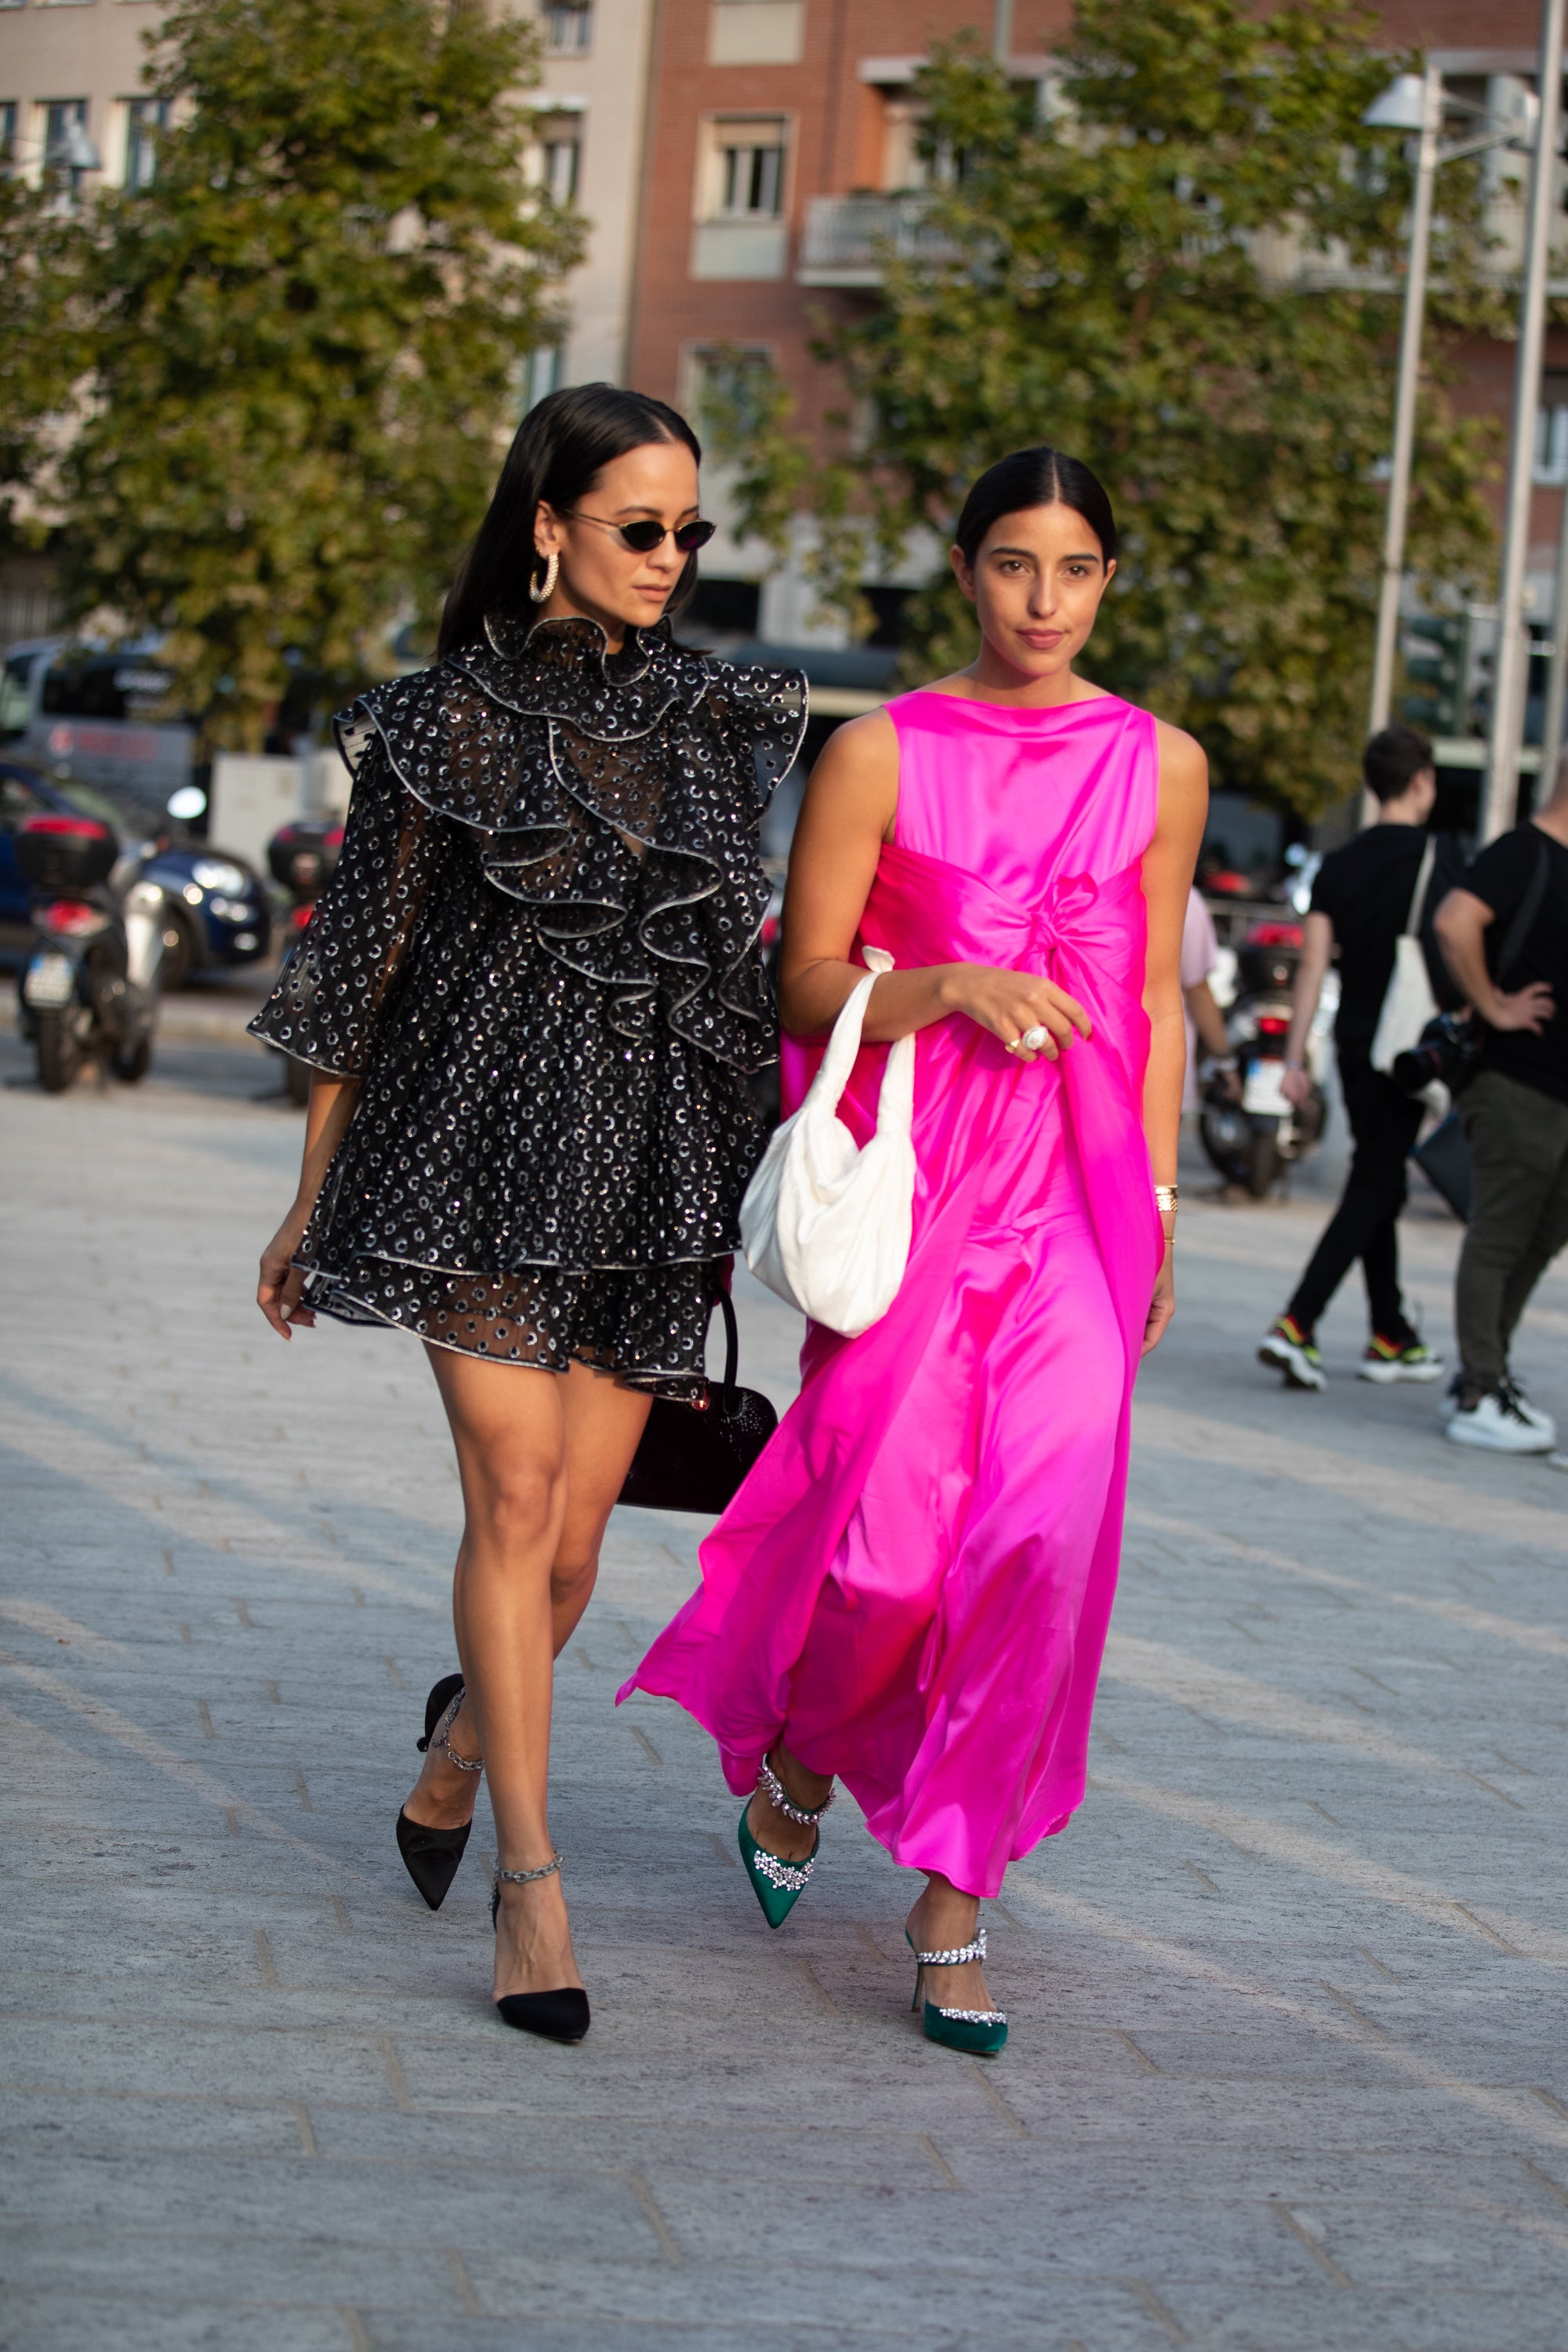 The Milan Fashion Week 2020 Street Style Is Truly Out of This World